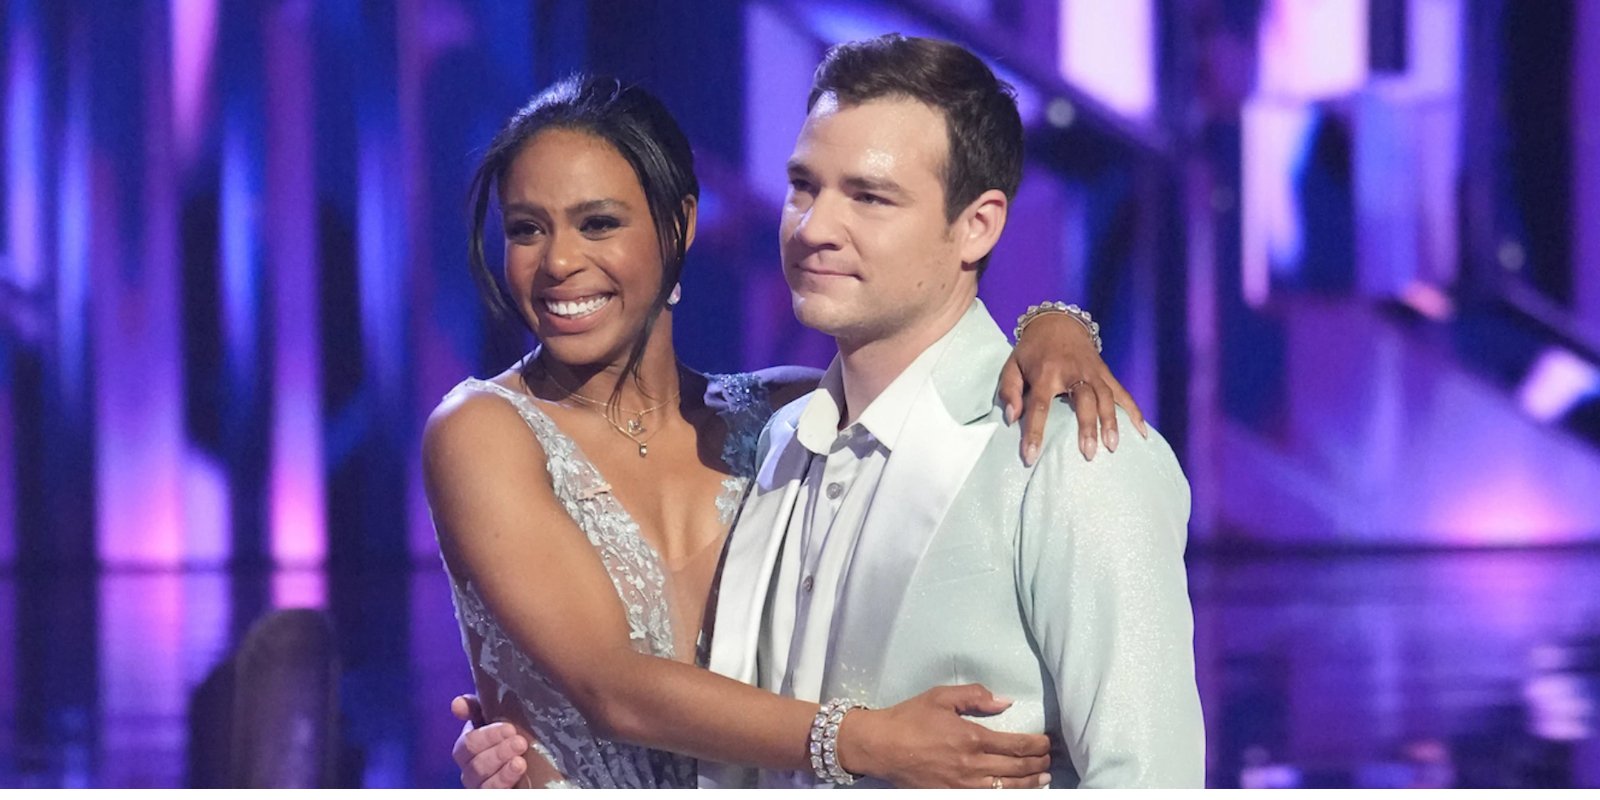 'Dancing with the Stars' Pro Britt Stewart Says of Winning Mirrorball With Daniel Durant 'I Think We Have a Shot'